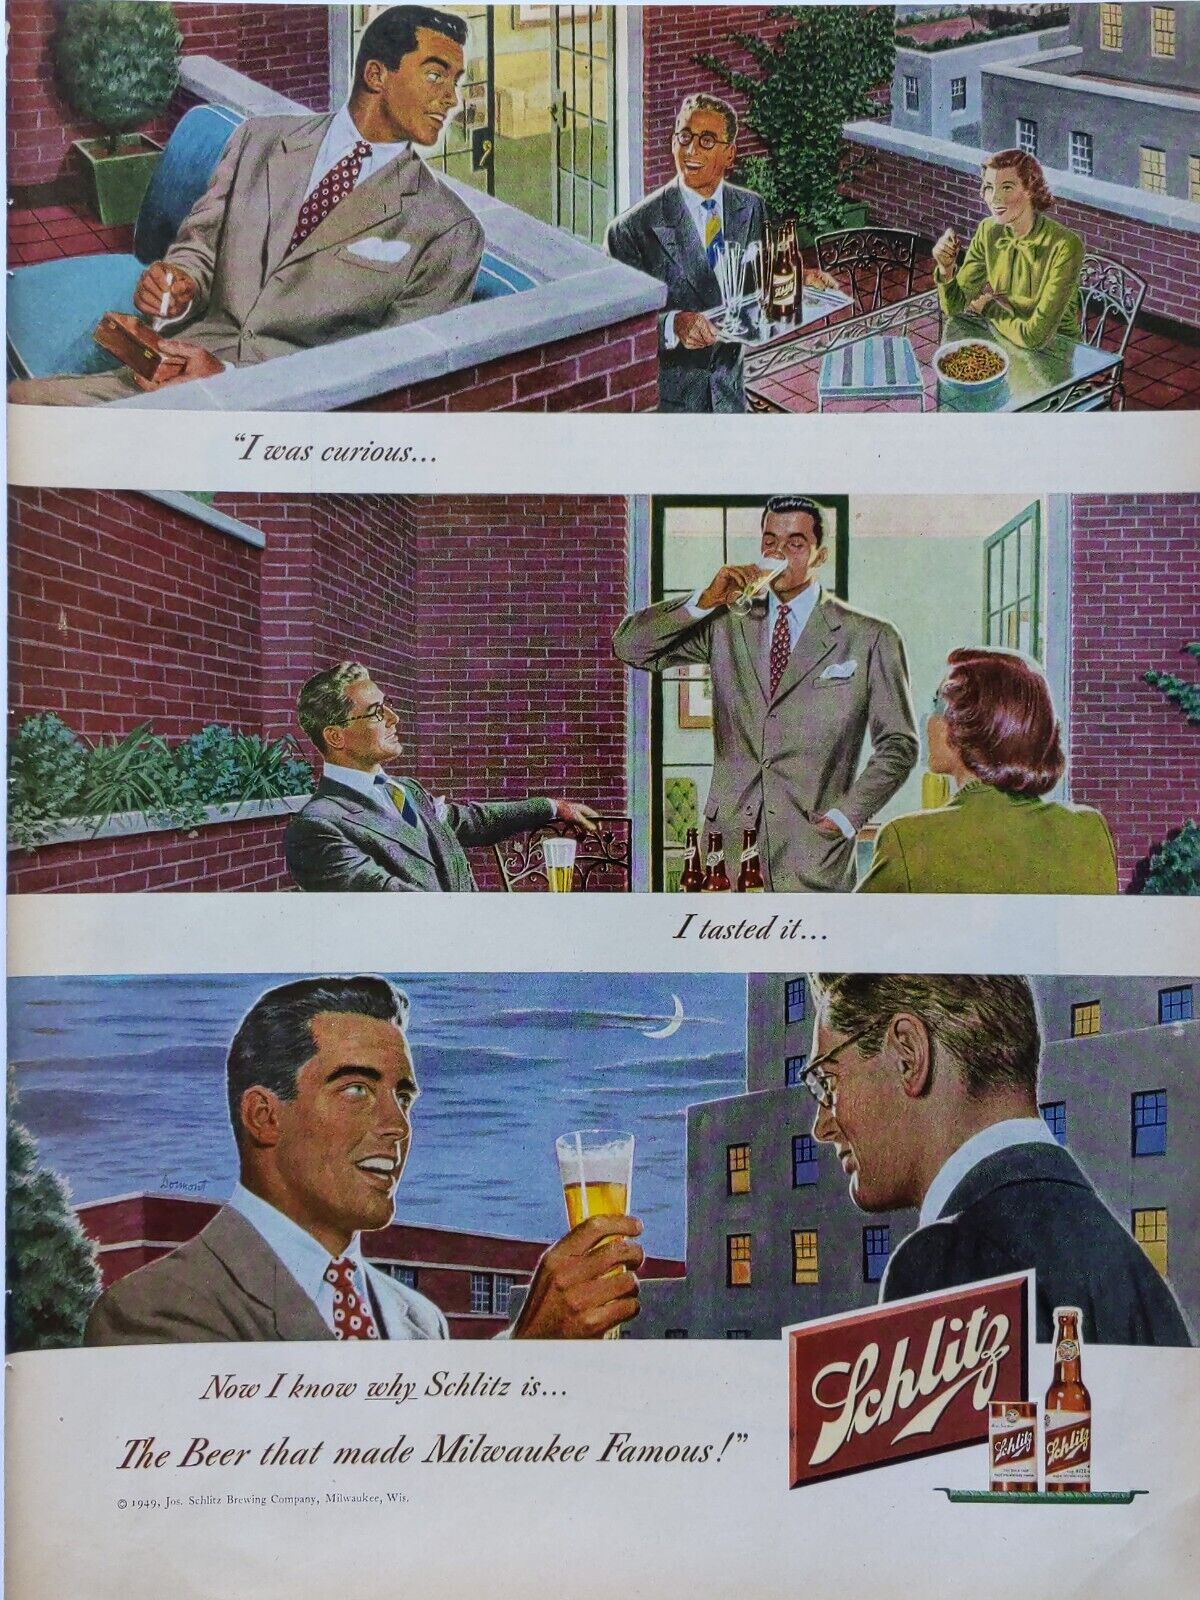 1949 vintage Schlitz beer ad. the beer that made Milwaukee famous. 